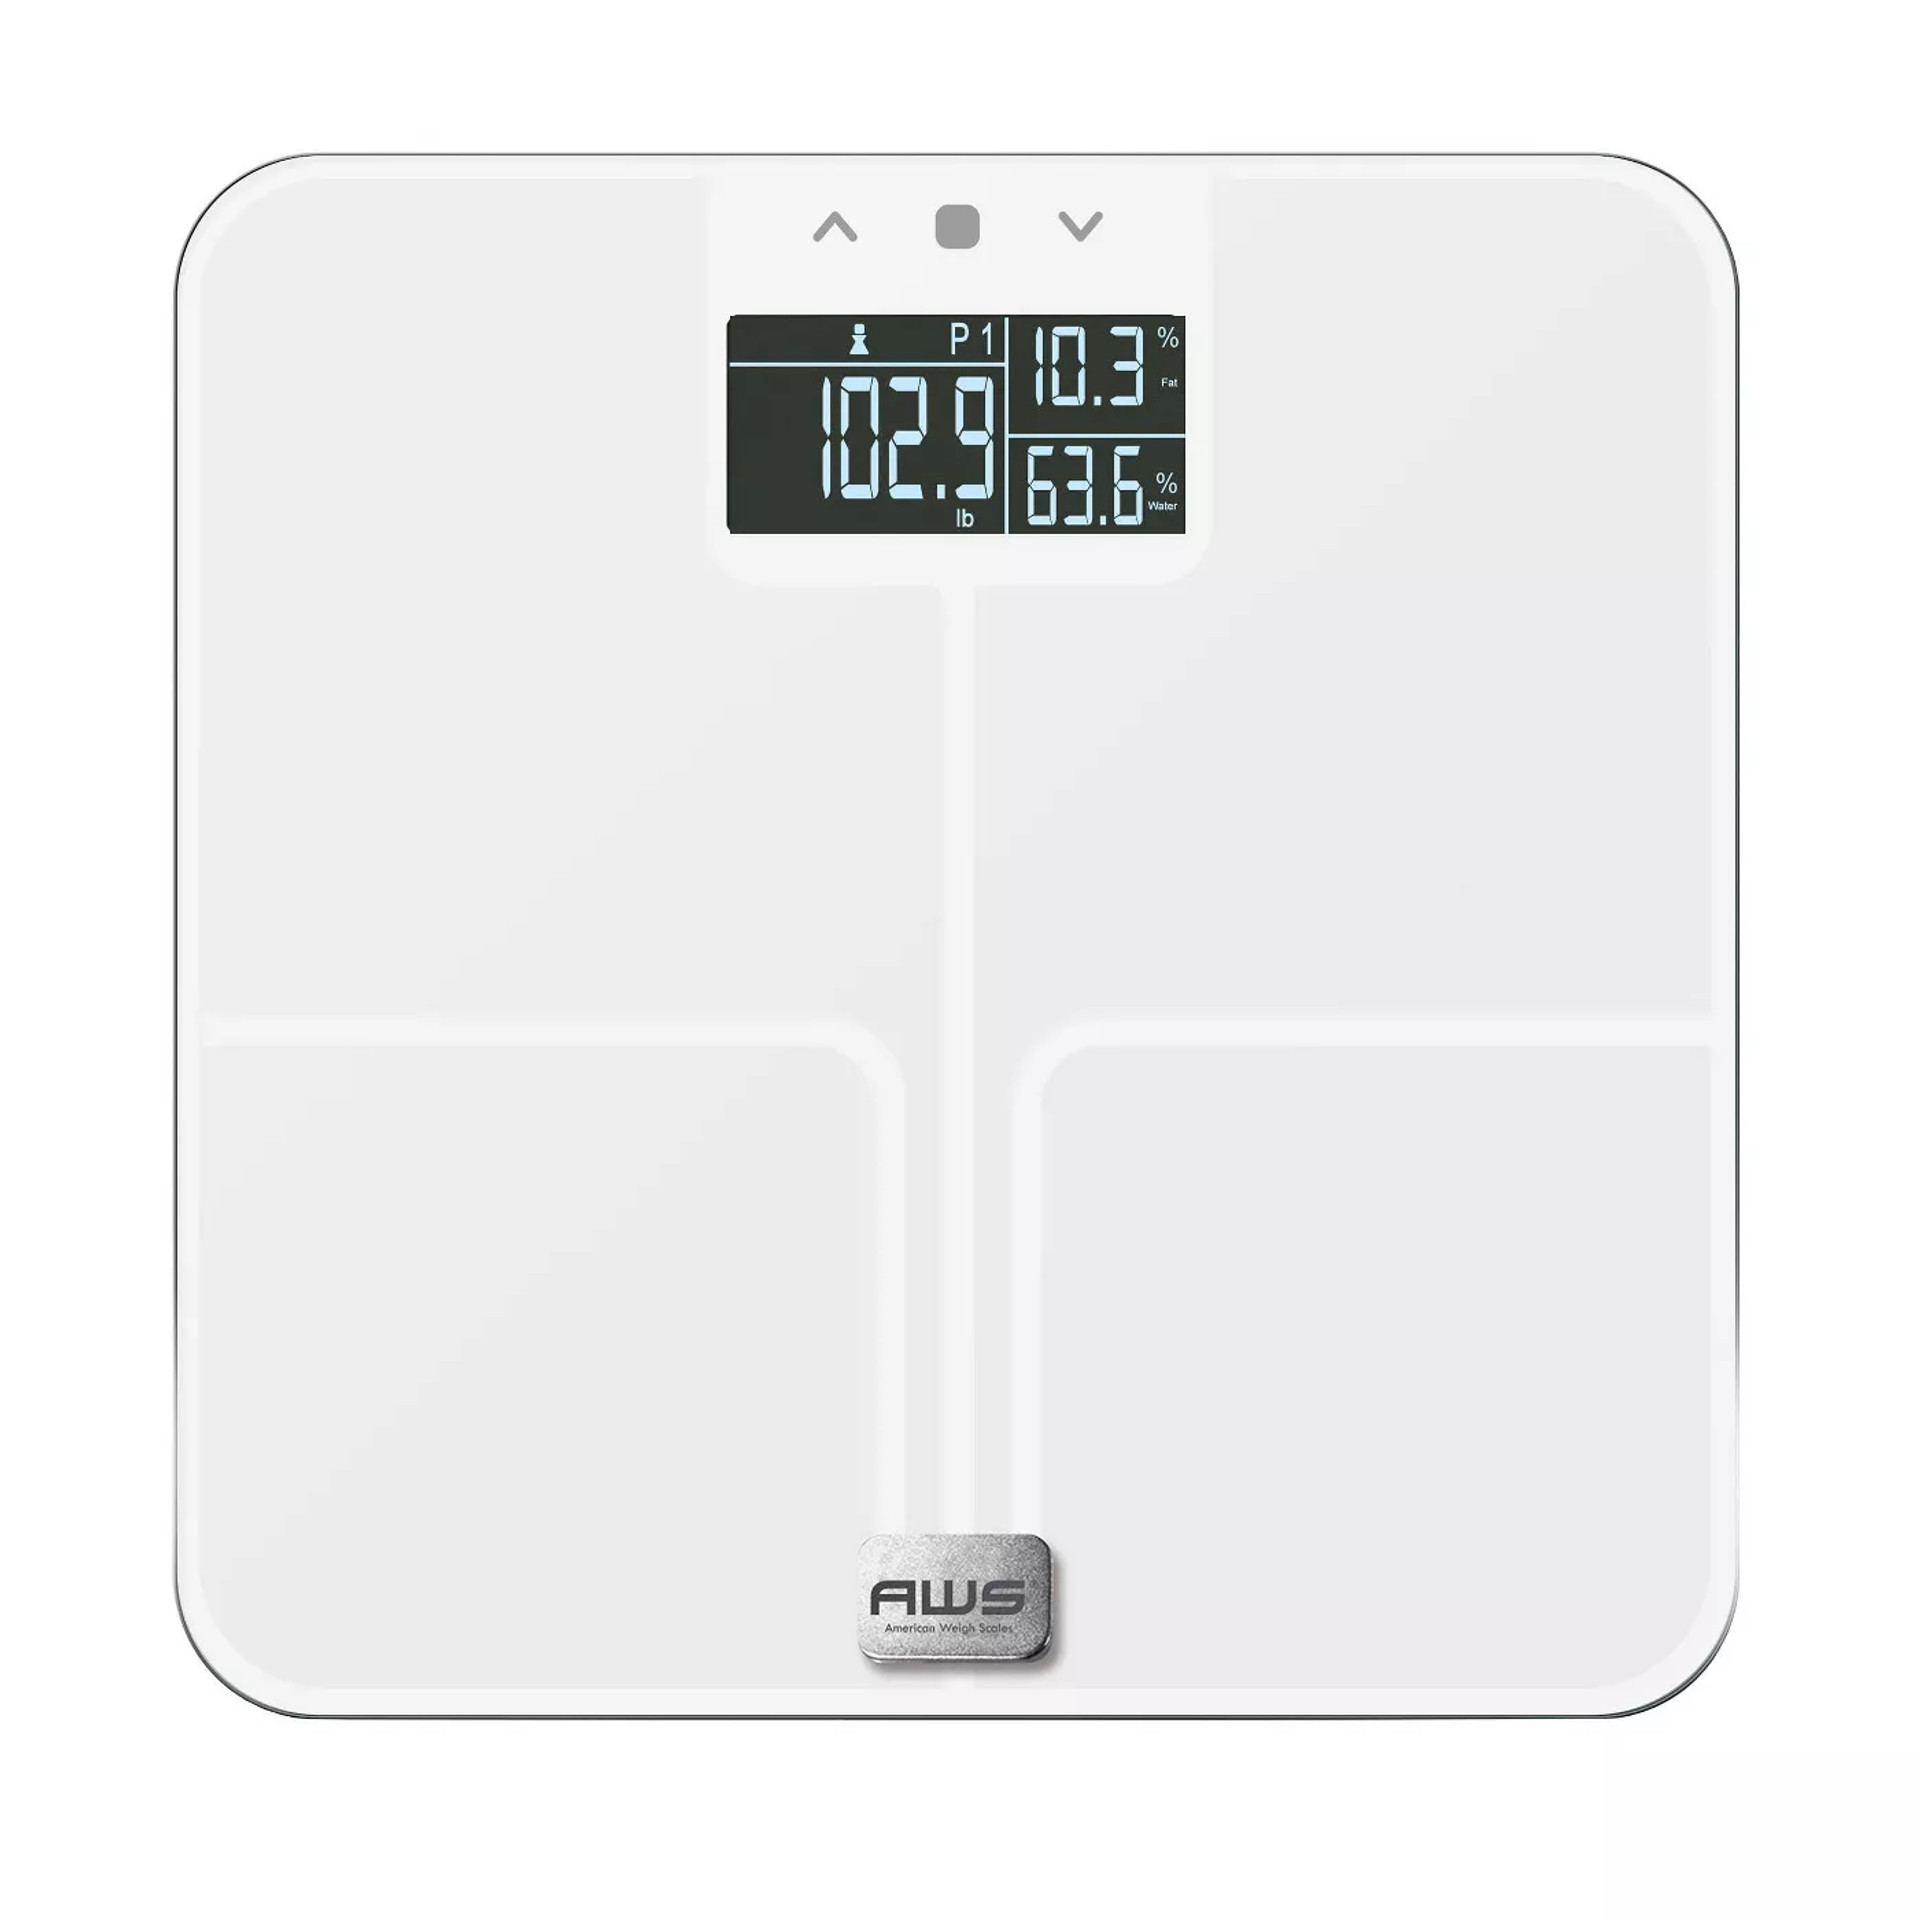 5KBOWL Digital Bowl Scale - American Weigh Scales